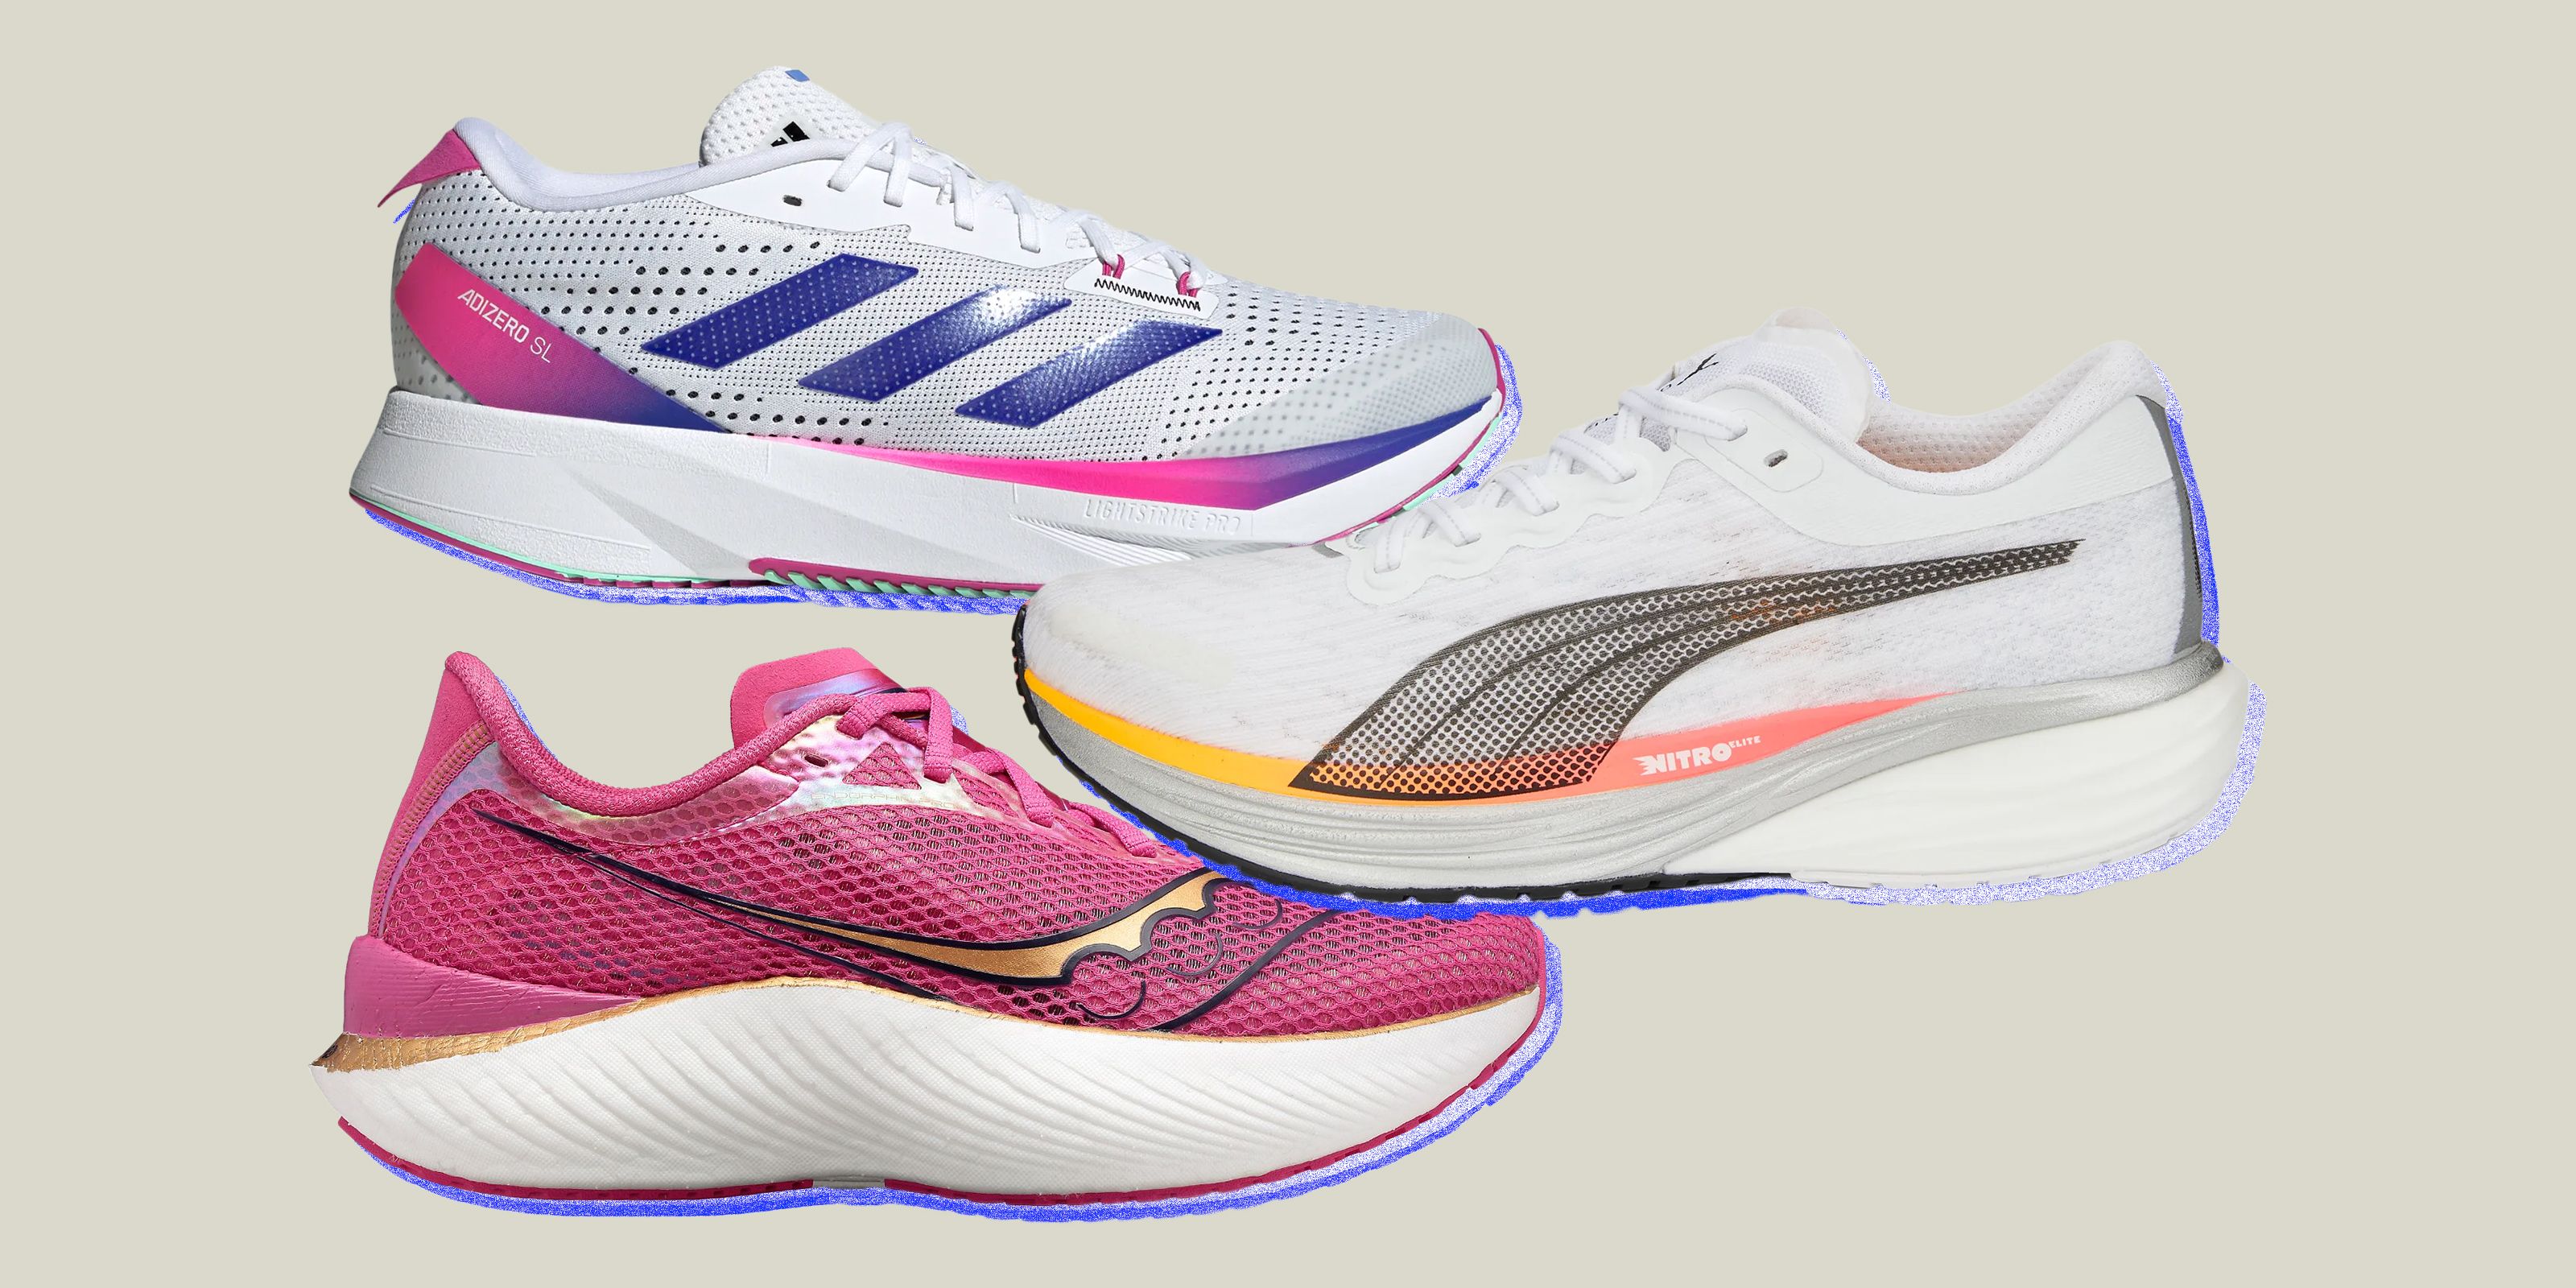 Take the Lead With the Best Marathon Running Shoes